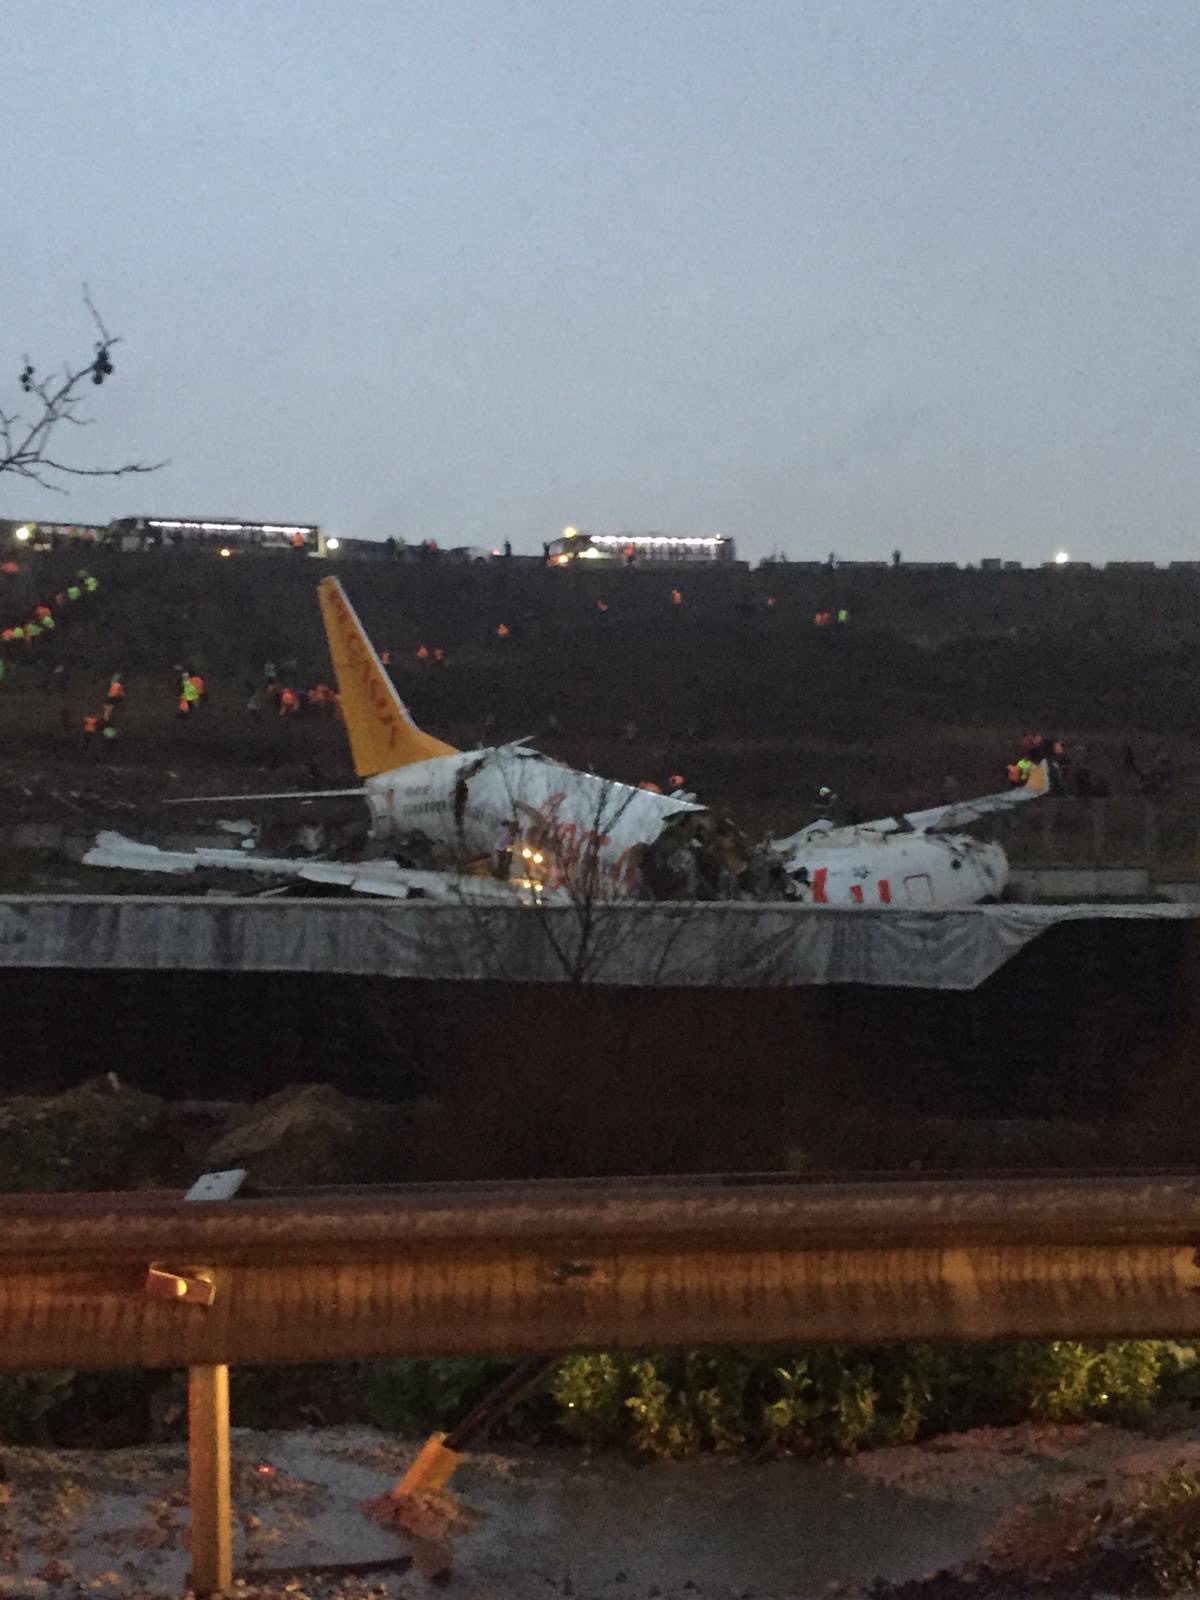 This picture taken on February 05, 2020, shows a Pegasus airlines boeing 737 plane after it skidded off the runway at Istanbul's Sabiha Gokcen airport. - A plane carrying 171 passengers skidded off the runway at an Istanbul airport and split into two after landing in rough weather on February 05, but officials said no-one had died. The aircraft had flown into Istanbul's Sabiha Gokcen airport from the Aegean city of Izmir in very wet weather, NTV broadcaster reported. At least 21 people were injured and taken to hospital, Istanbul Governor Ali Yerlikaya said on Twitter. 